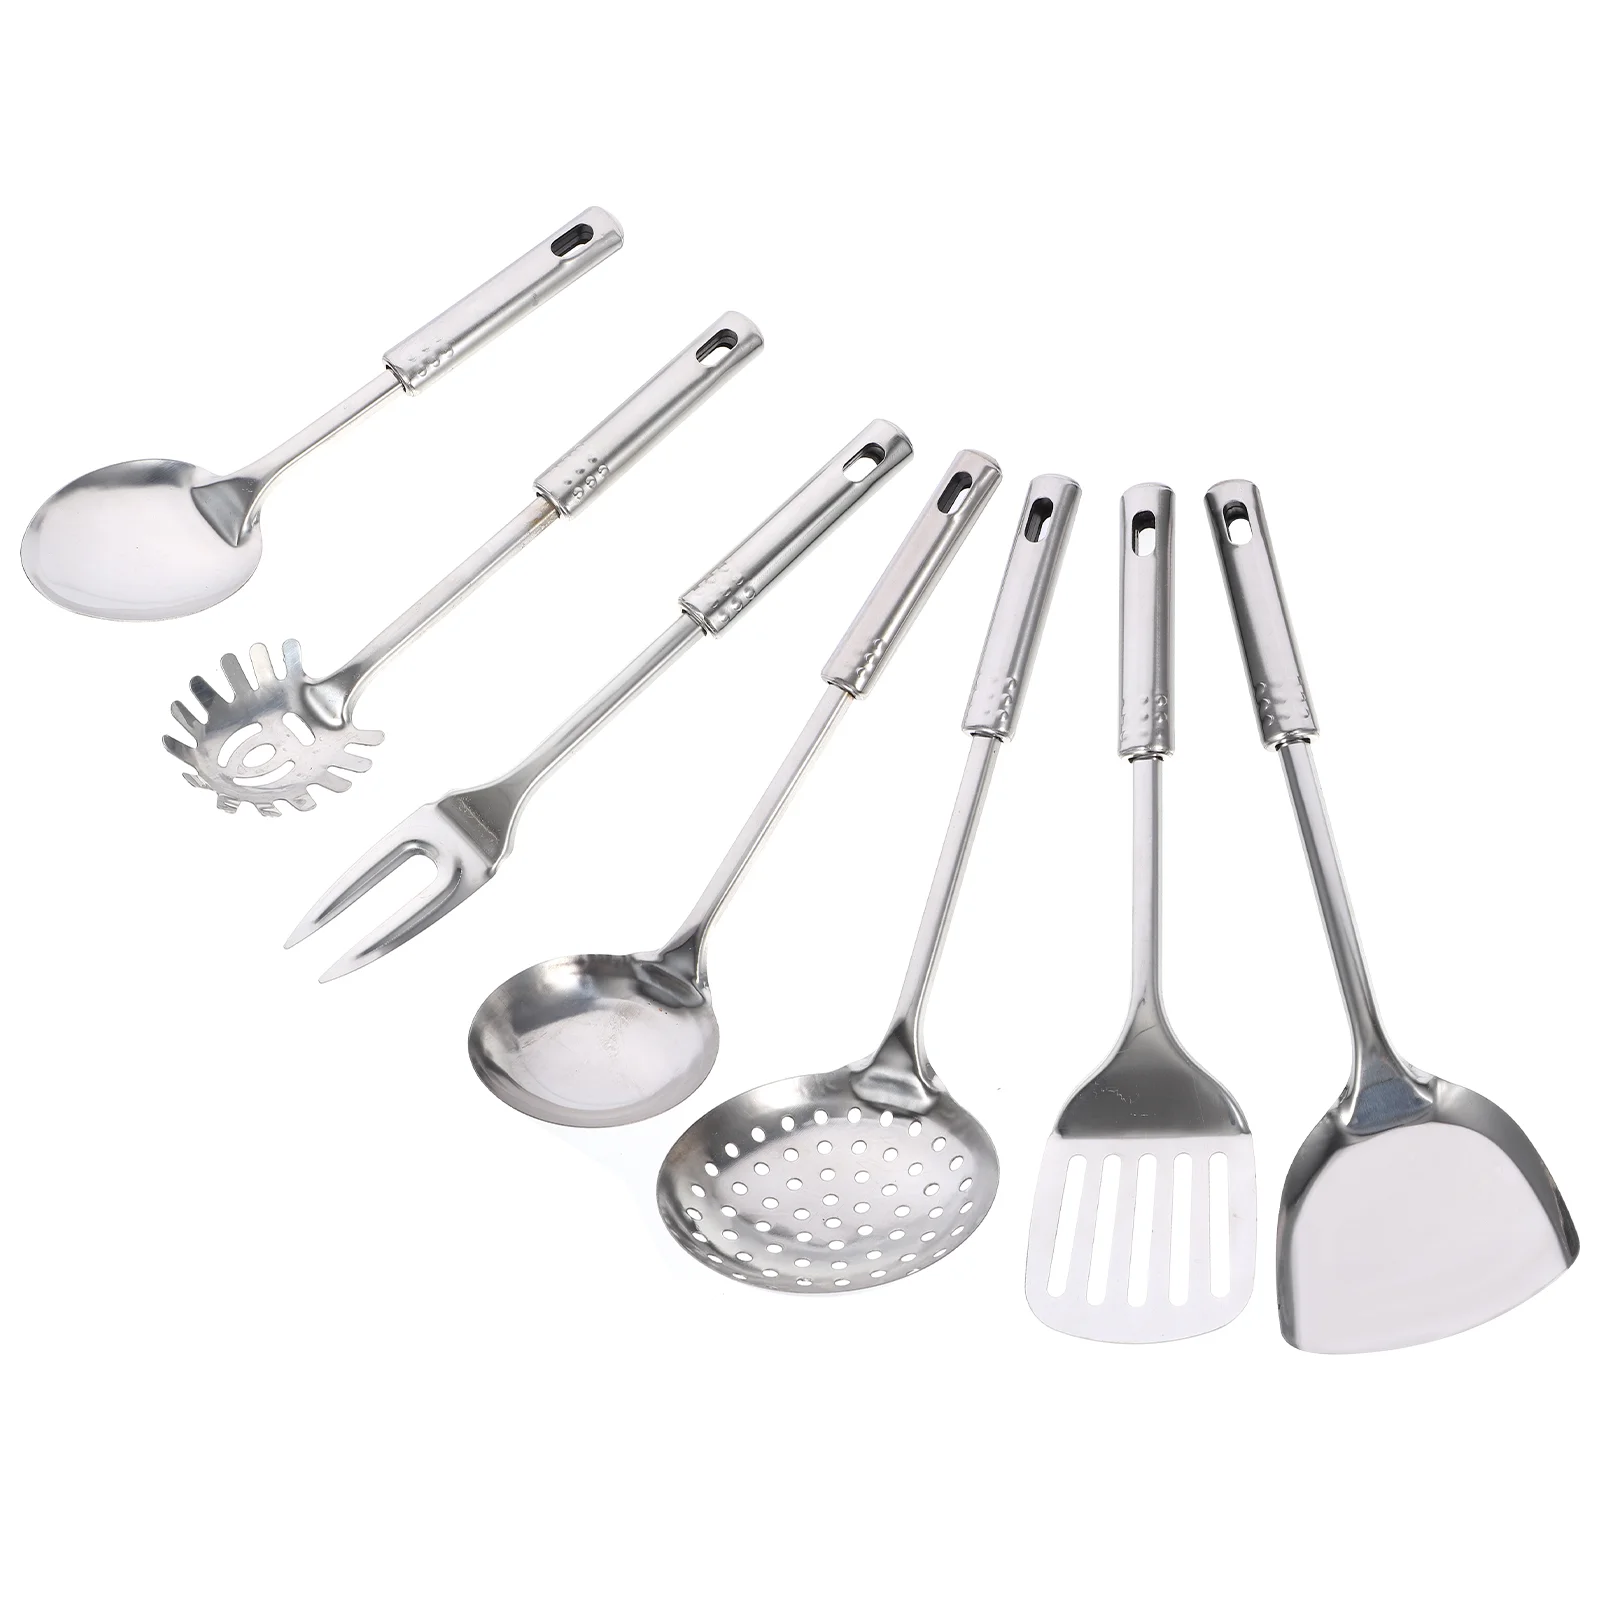 

Cooking Kitchen Stainless Steel Set Utensils Utensil Spatula Spoon Kitchenware Tools Gadgets Cookware Colander Sets Soup Turner